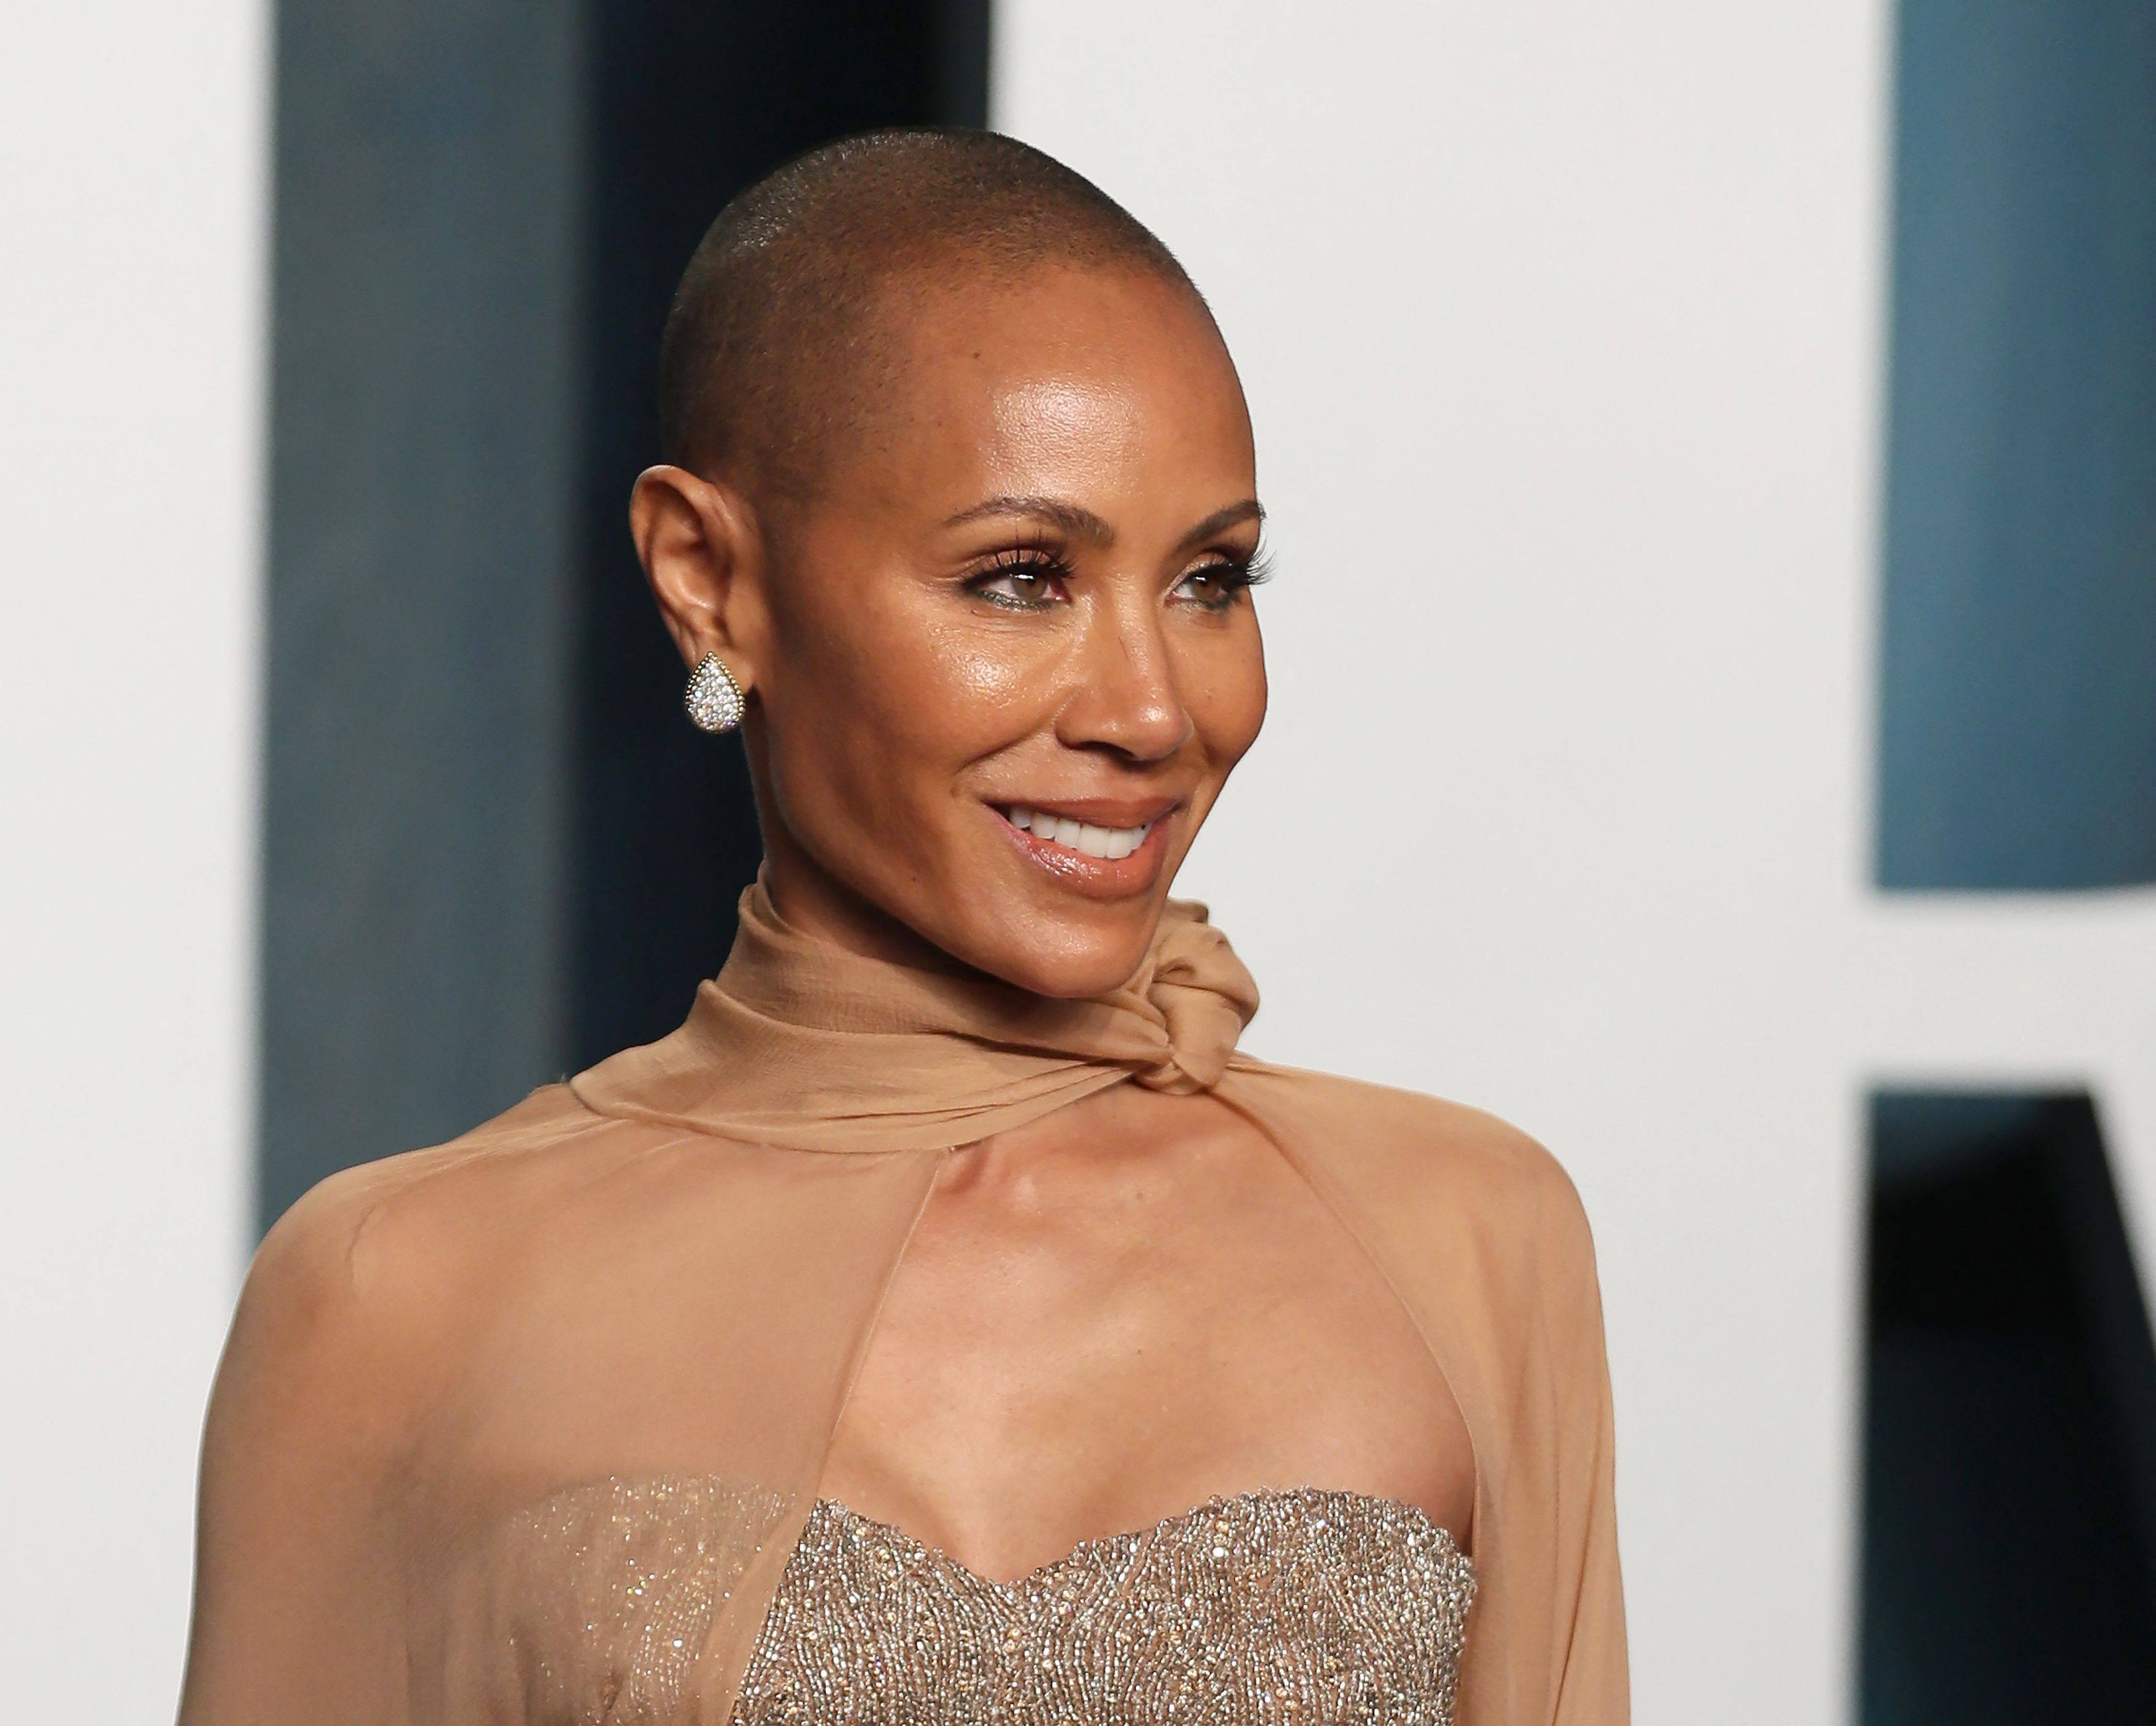 What is alopecia, Jada Pinkett Smith's hair loss condition that Will Smith  put in the spotlight with his Oscar slap? Its cause is unknown and it has  no cure, but hair can